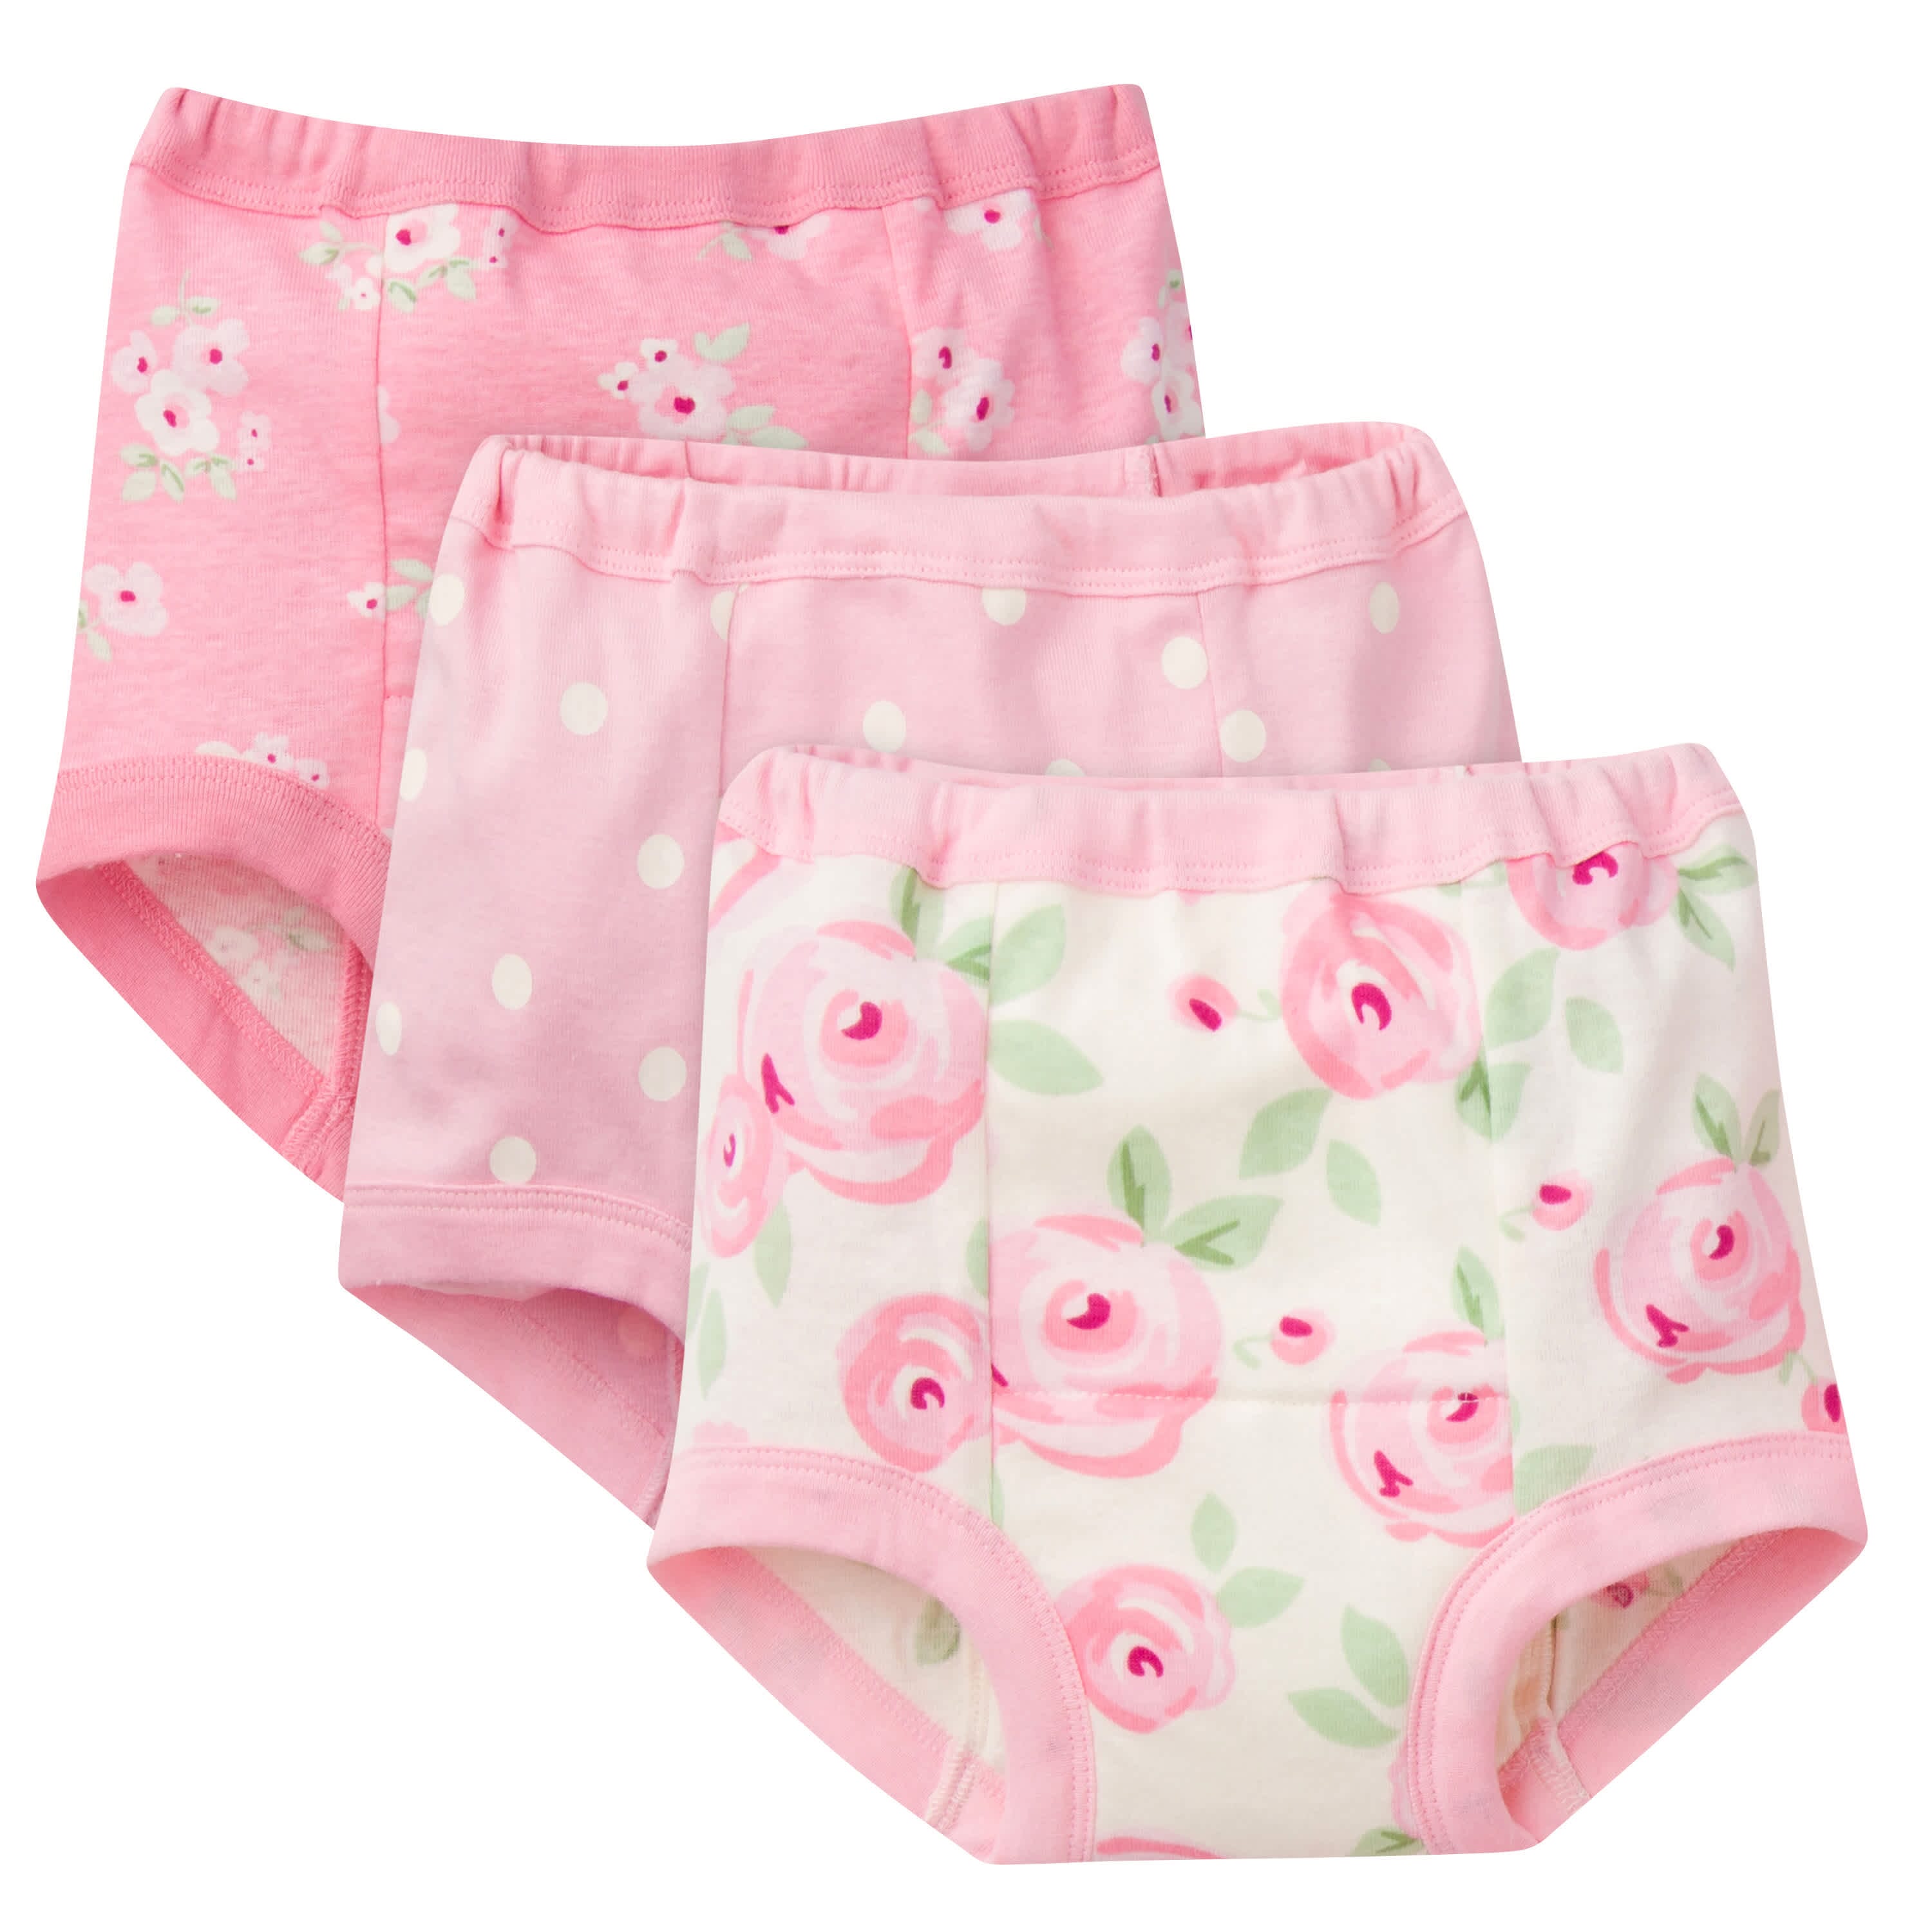 Gerber Toddler Girl's Assorted Training Pants 3-pack Pink 2t for